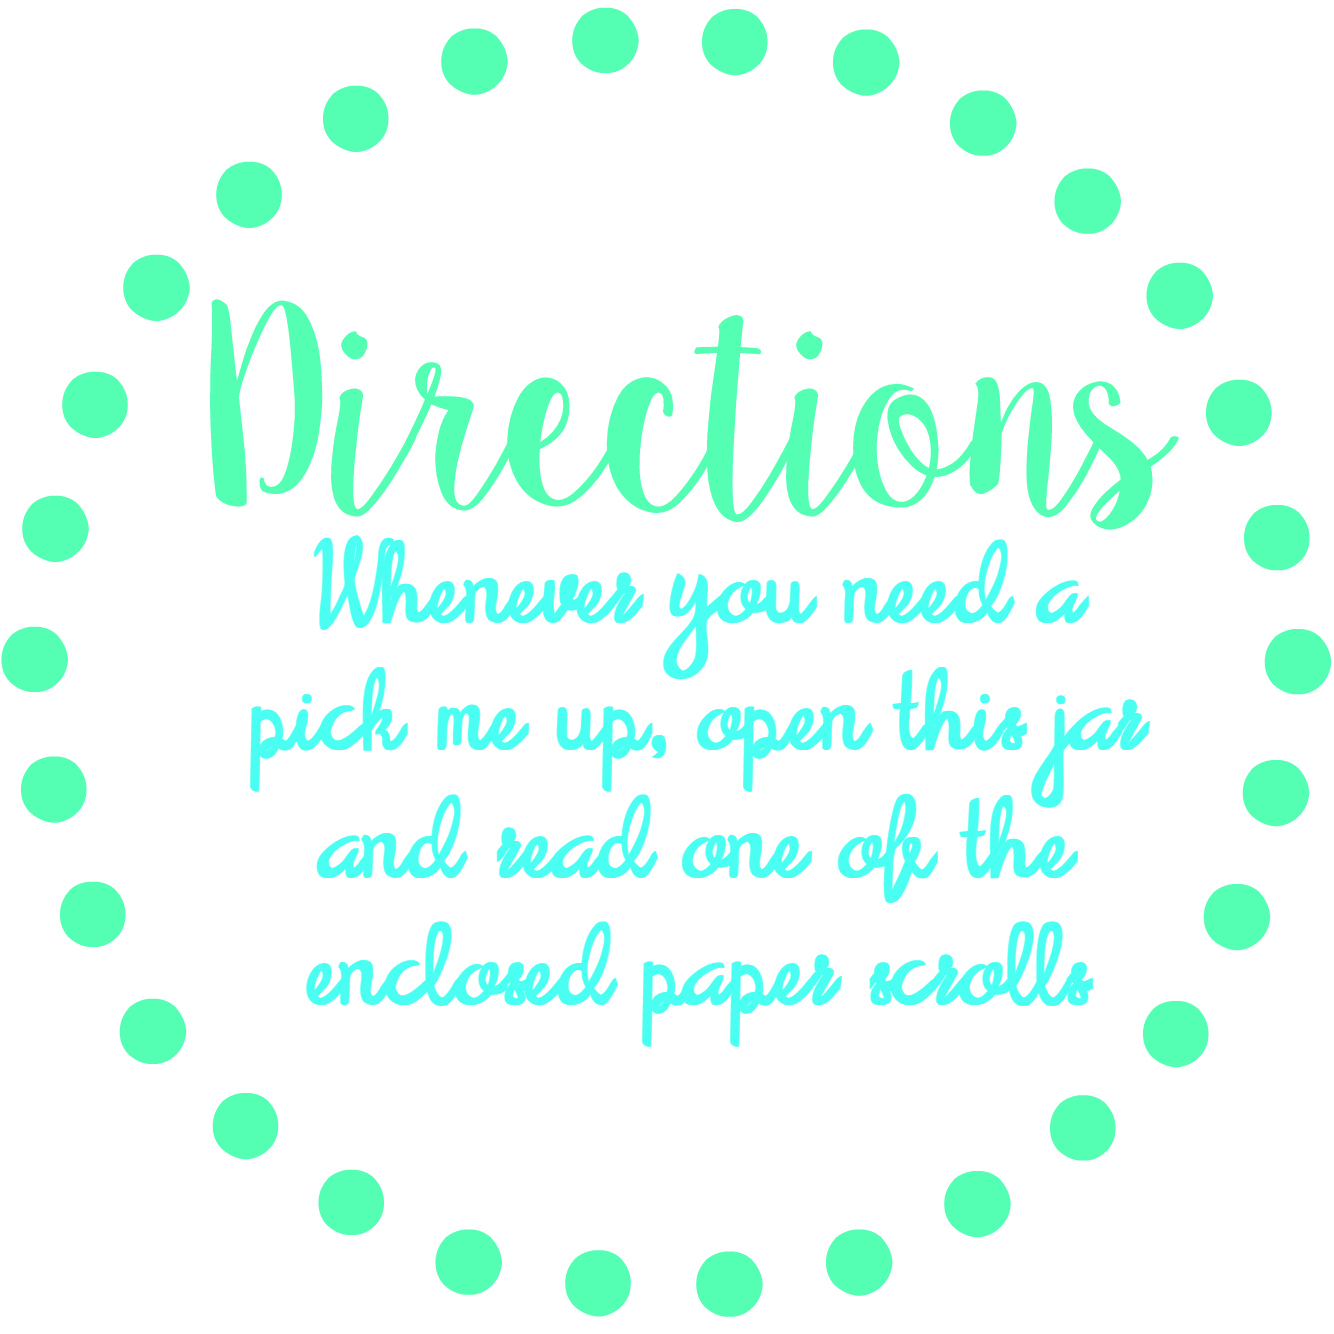 Directions